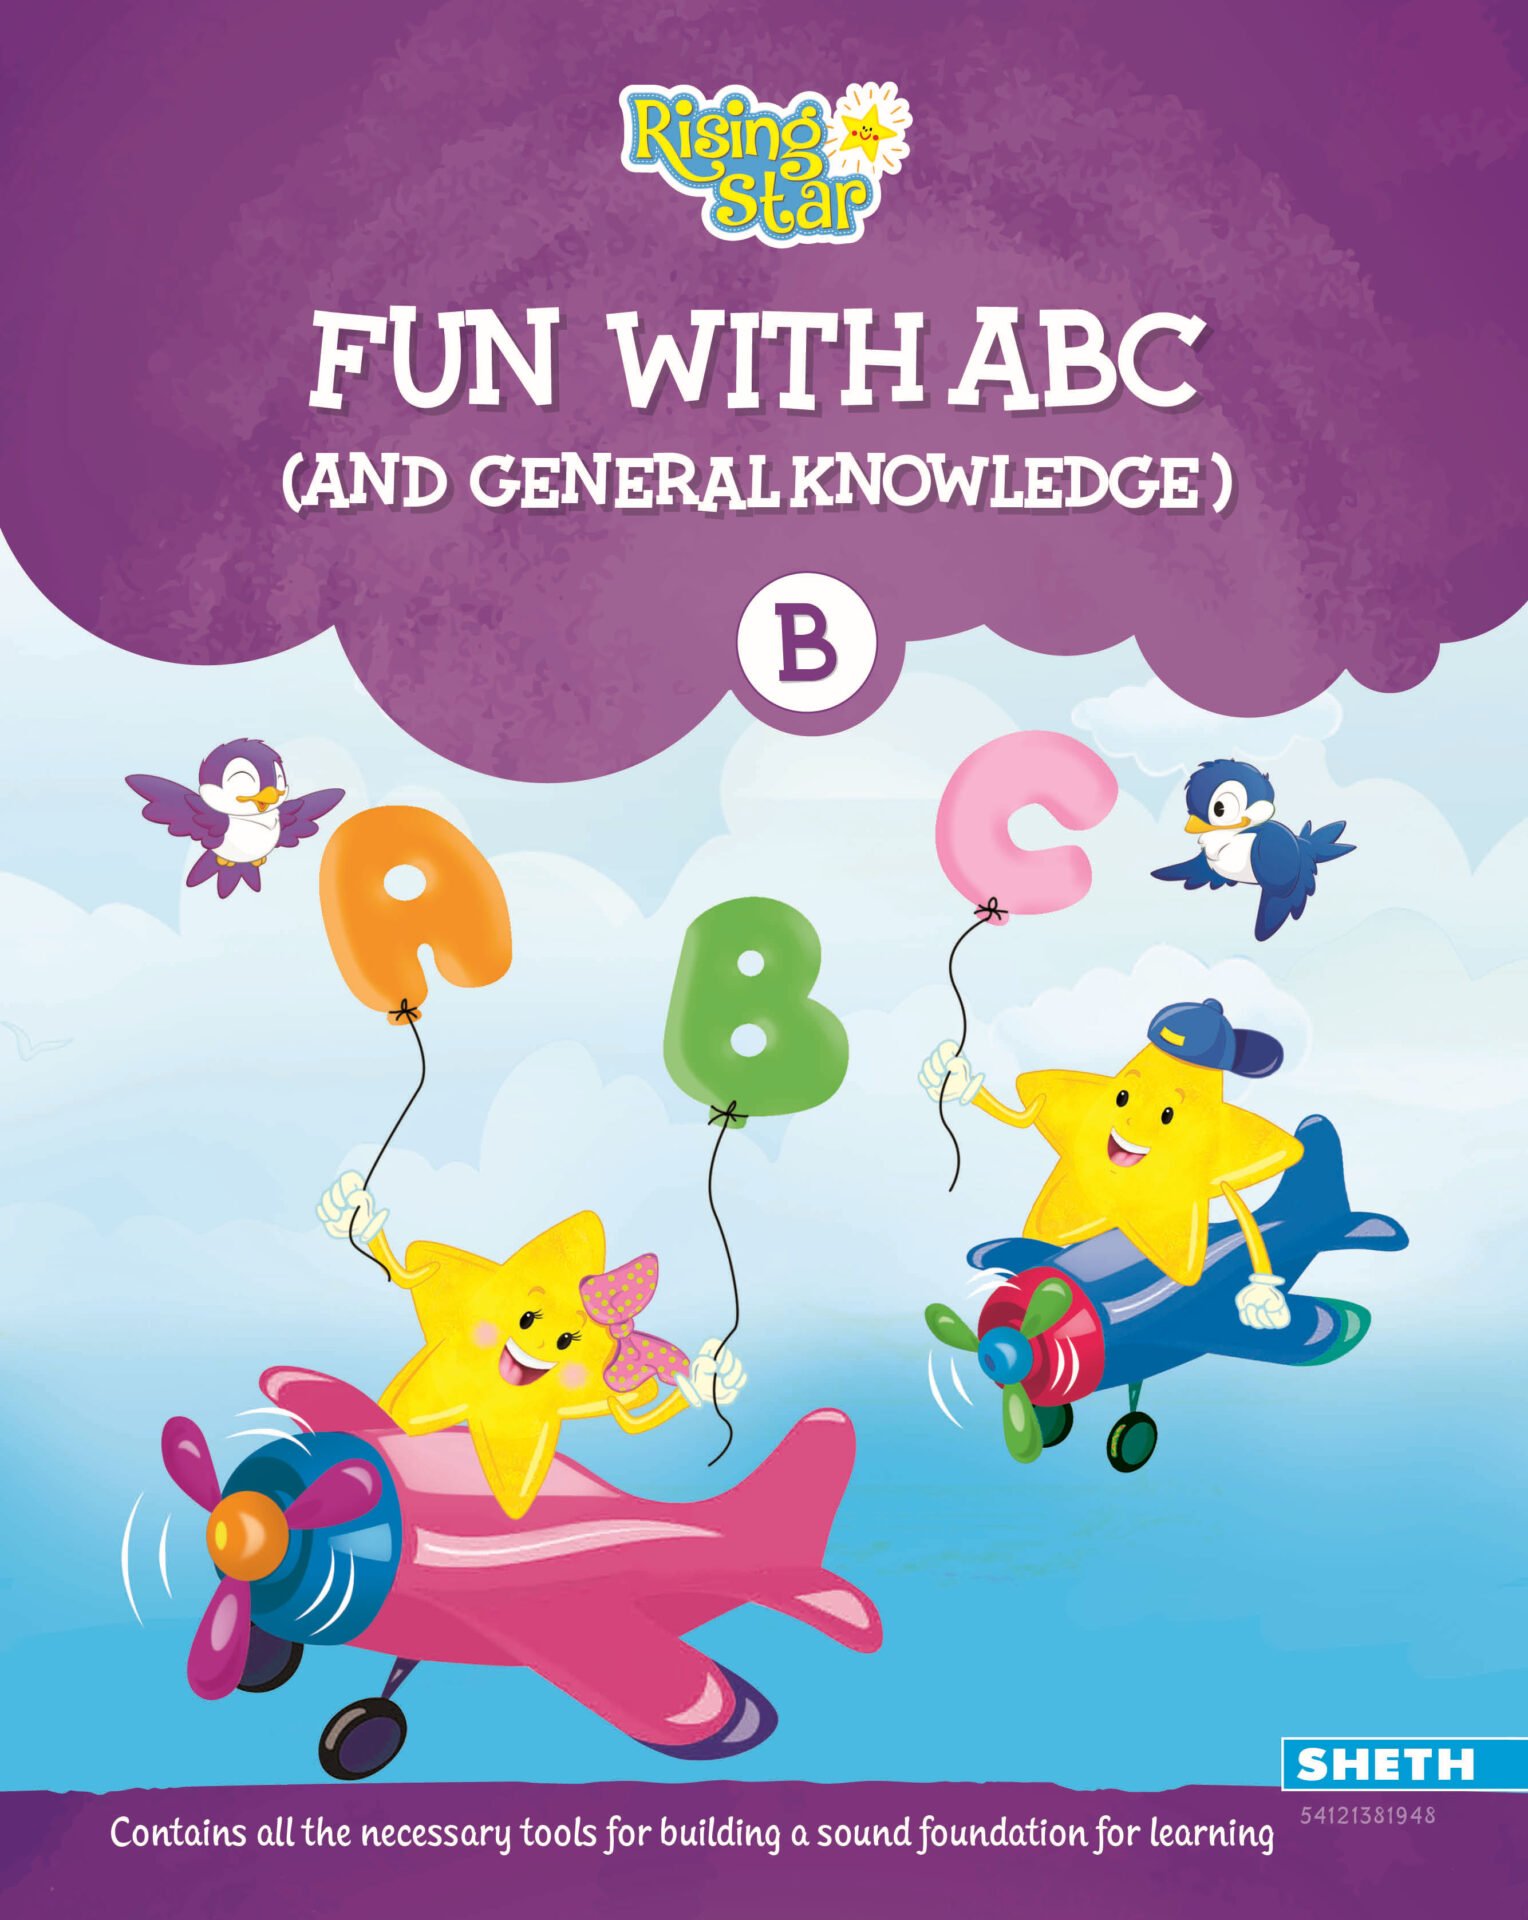 Rising Star Fun with ABC and General Knowledge B 1